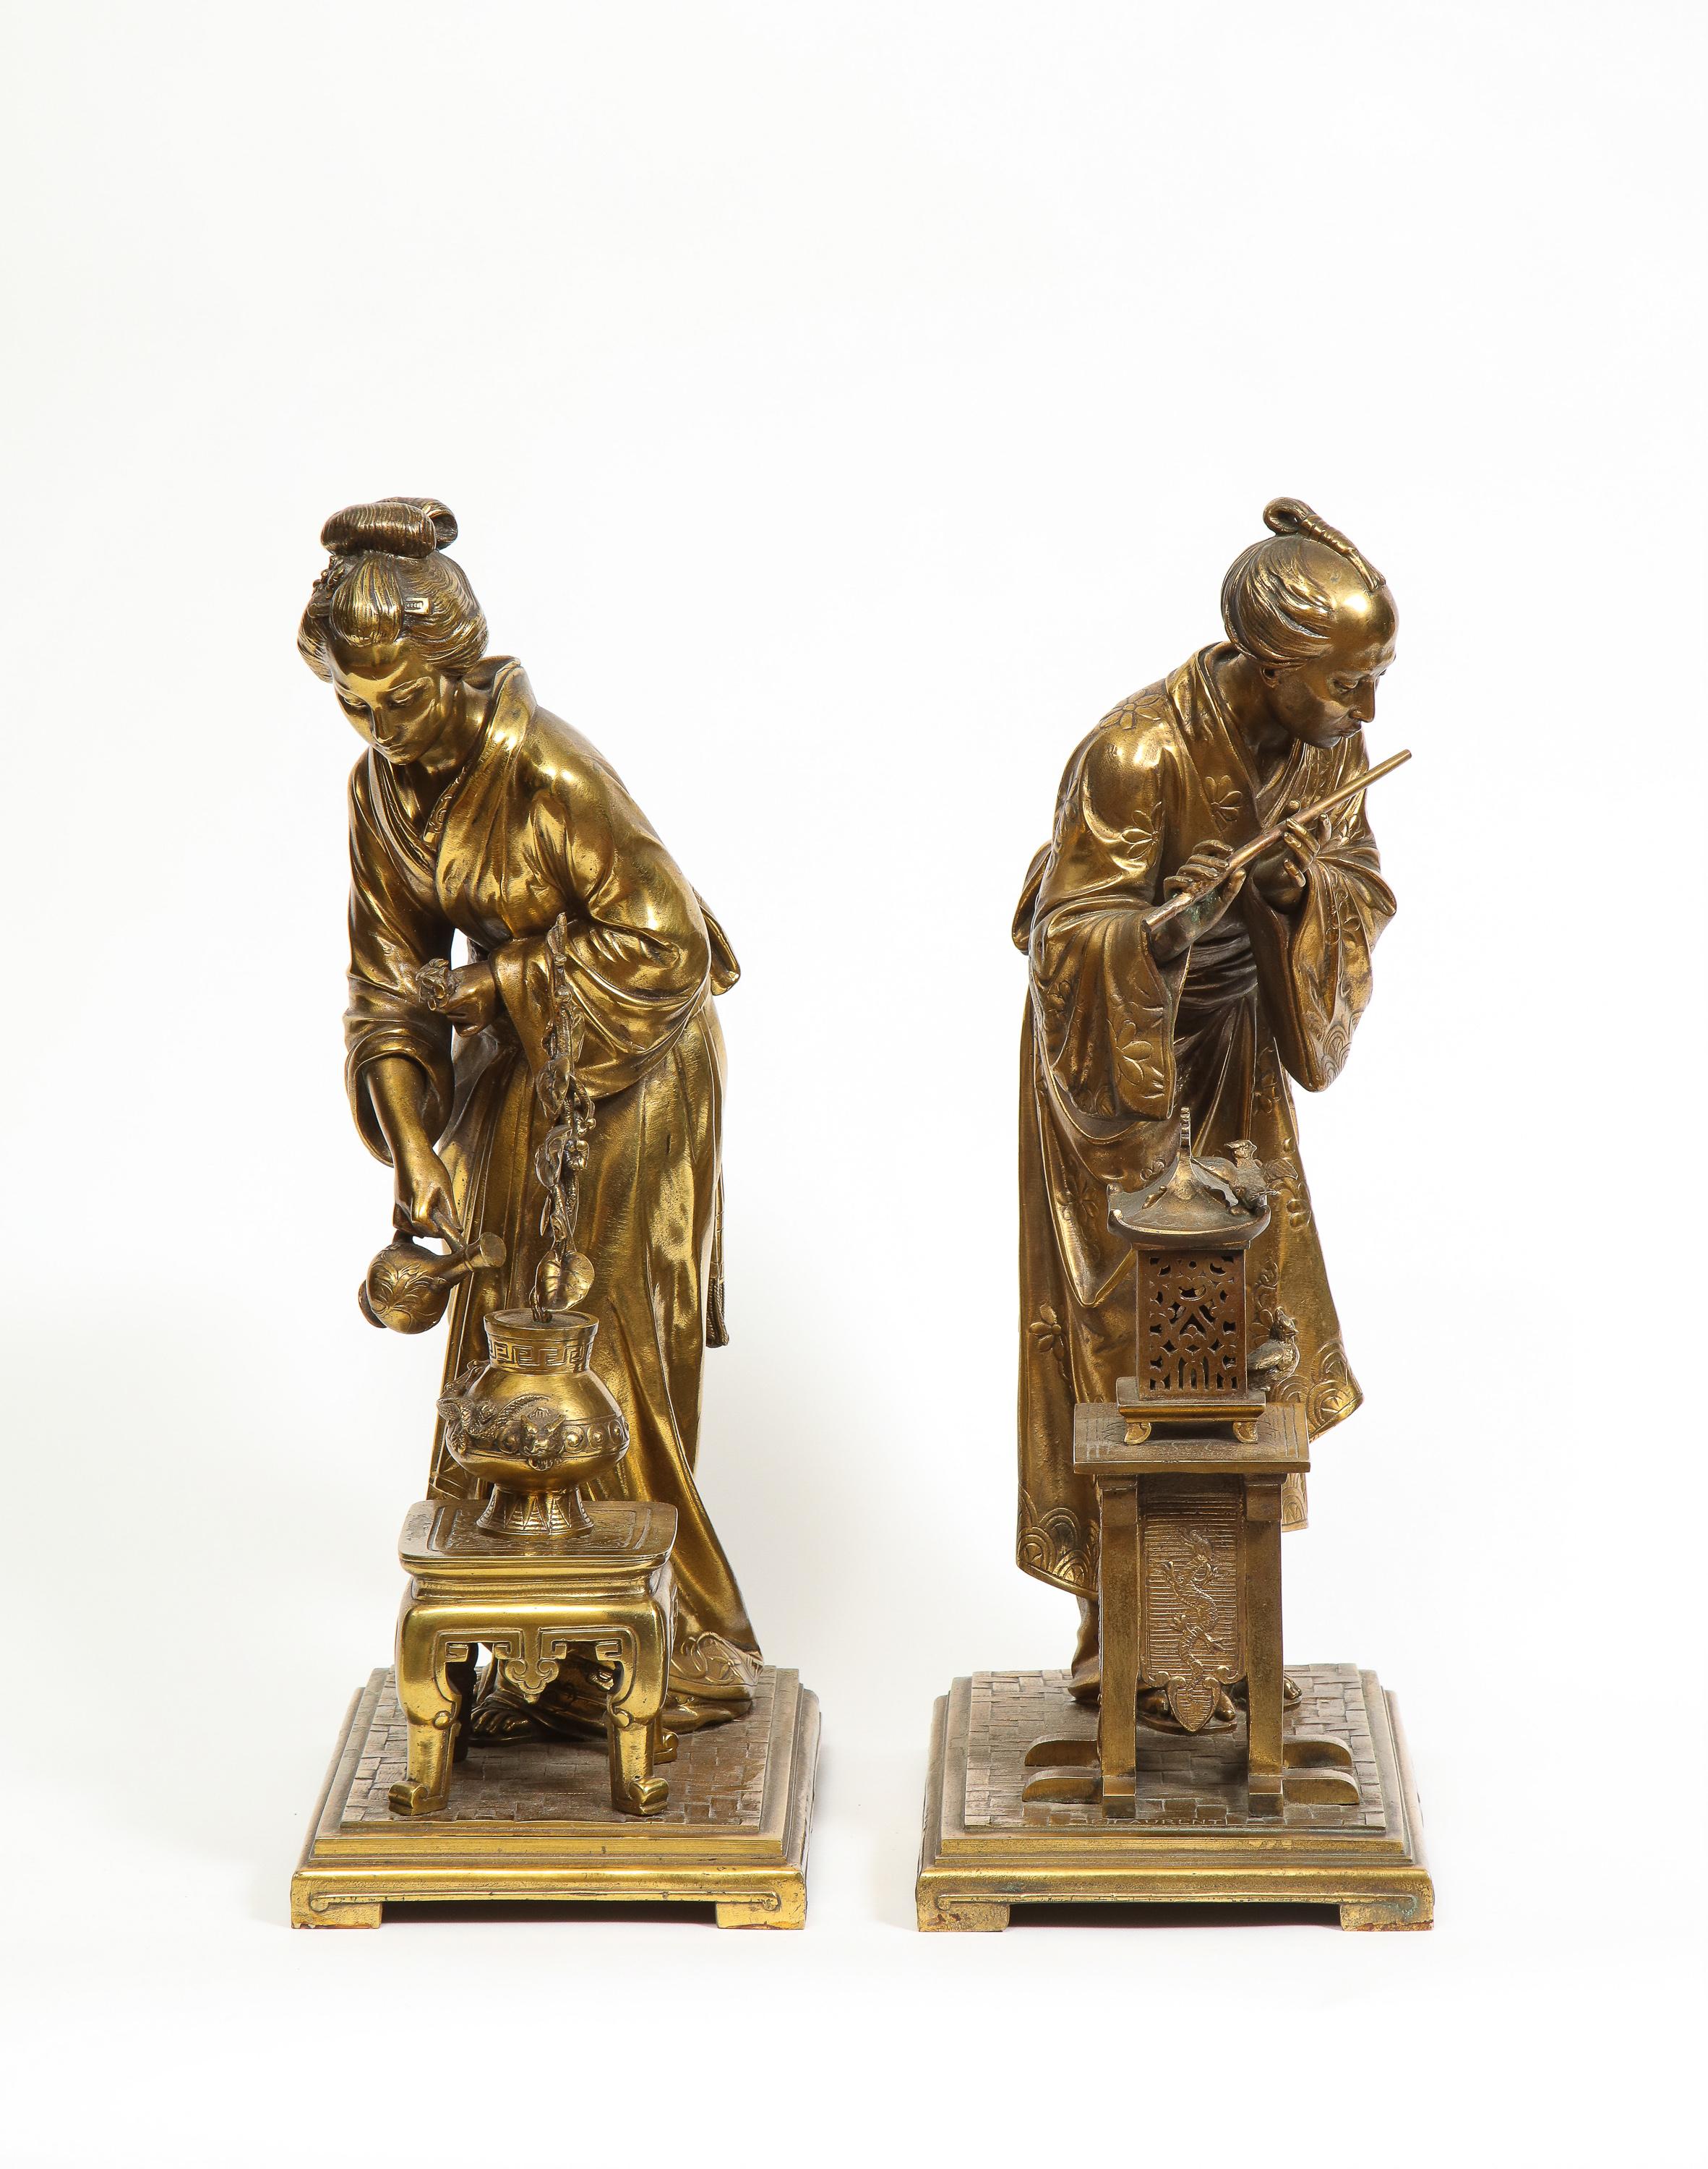 A Rare Pair of French Japonisme Bronze Sculptures by Eugene Laurent, circa 1870 11